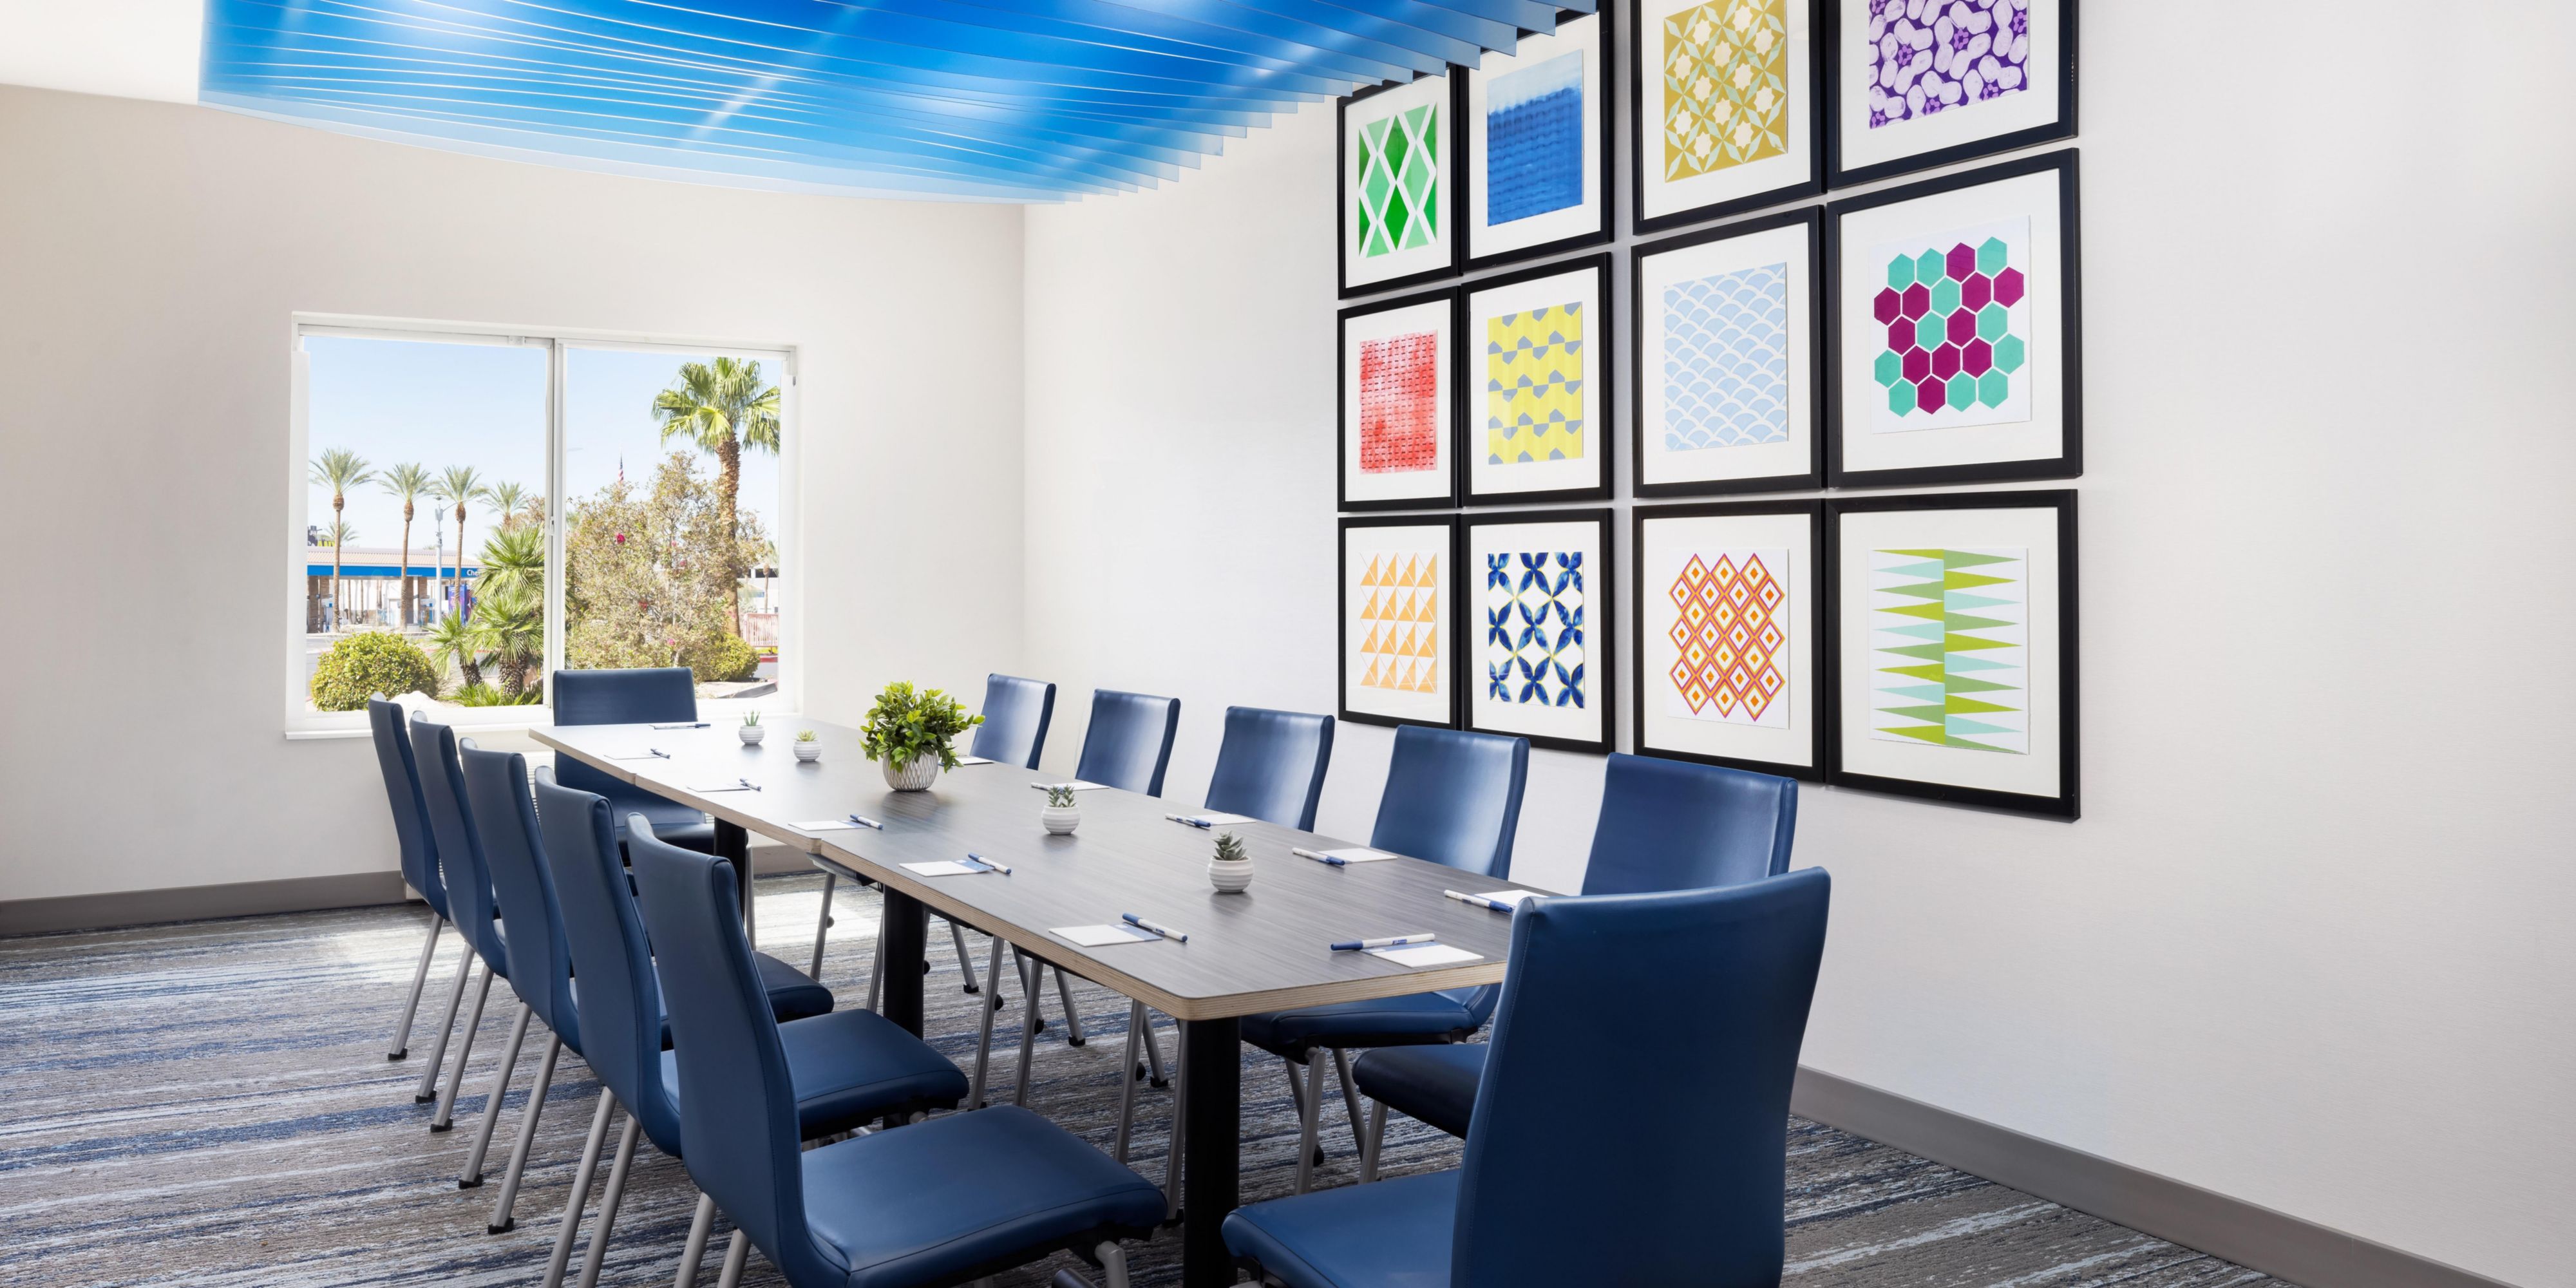 Holiday Inn Express Las Vegas - South has a meeting room on site. Room Rental includes high speed Wi-Fi. Call today to reserve your space!
